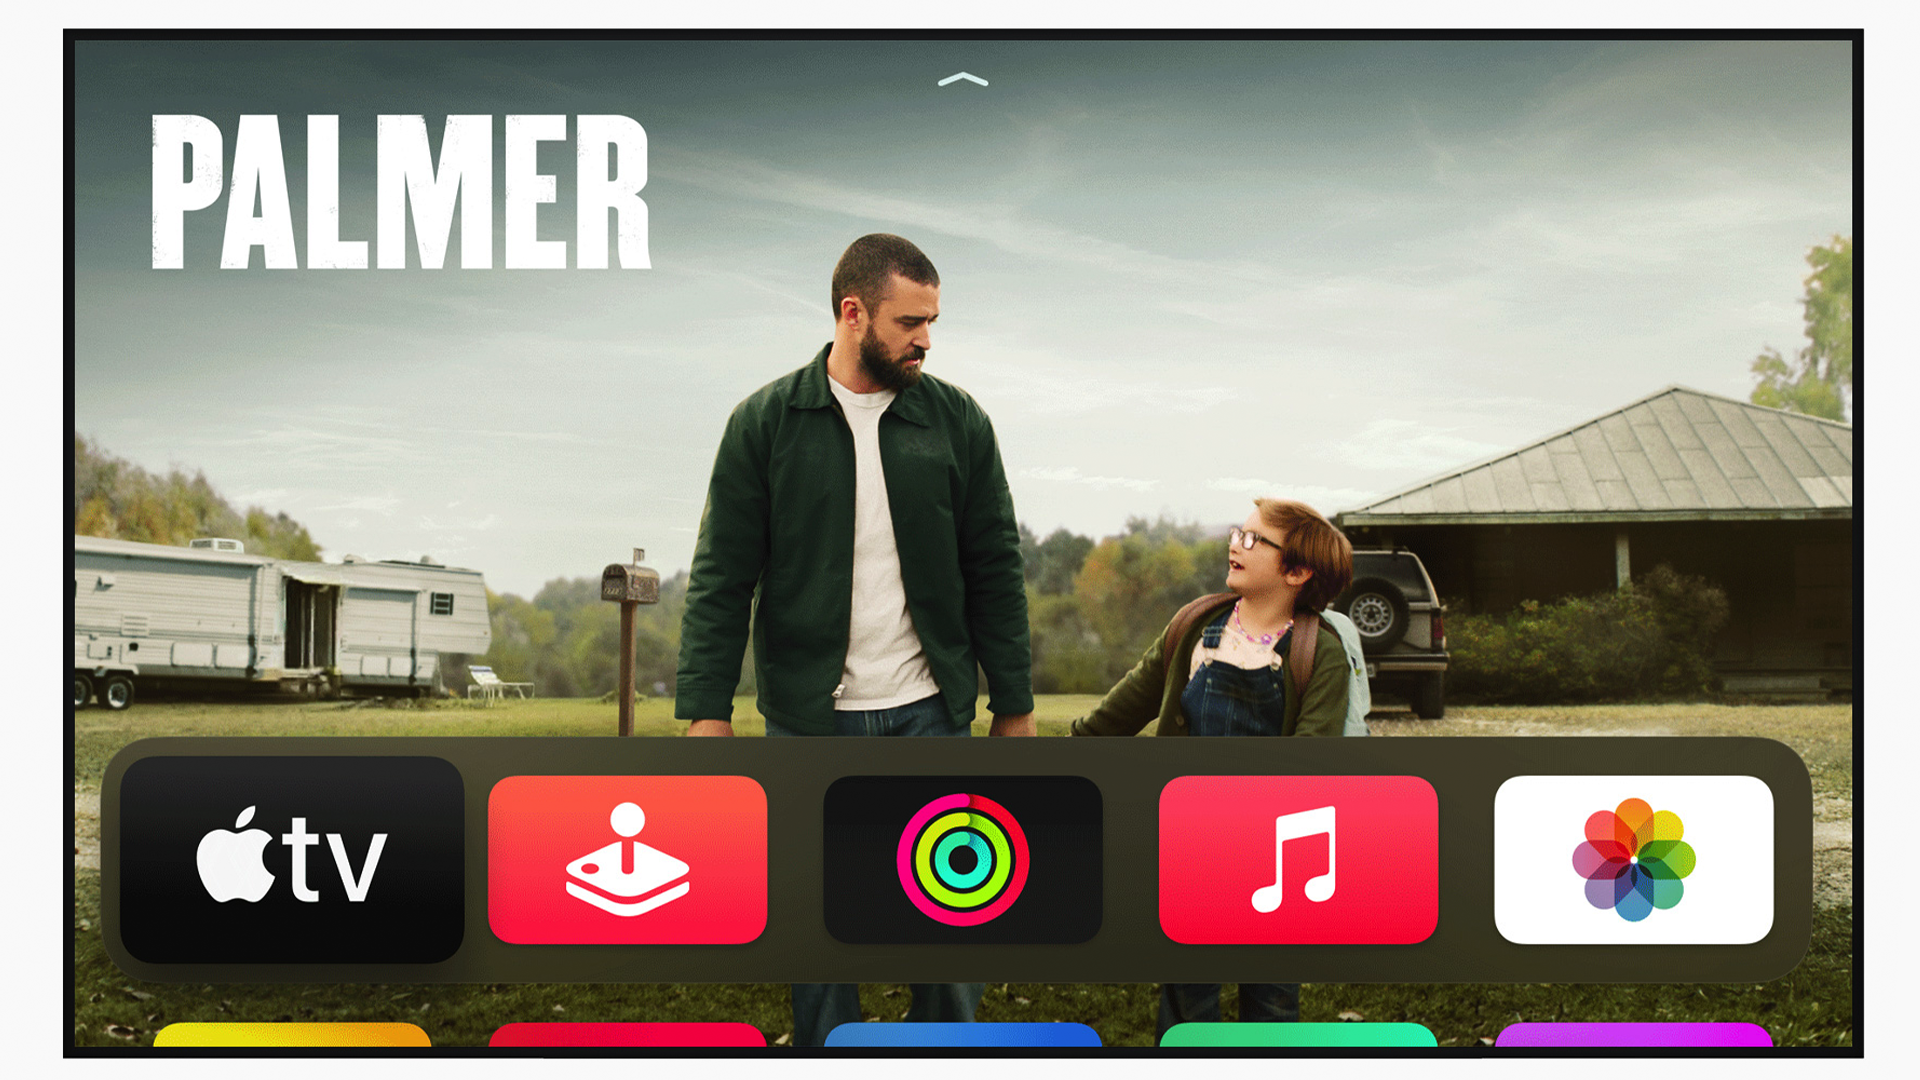 The Apple TV interface, which shows a banner just above a collection of apps.